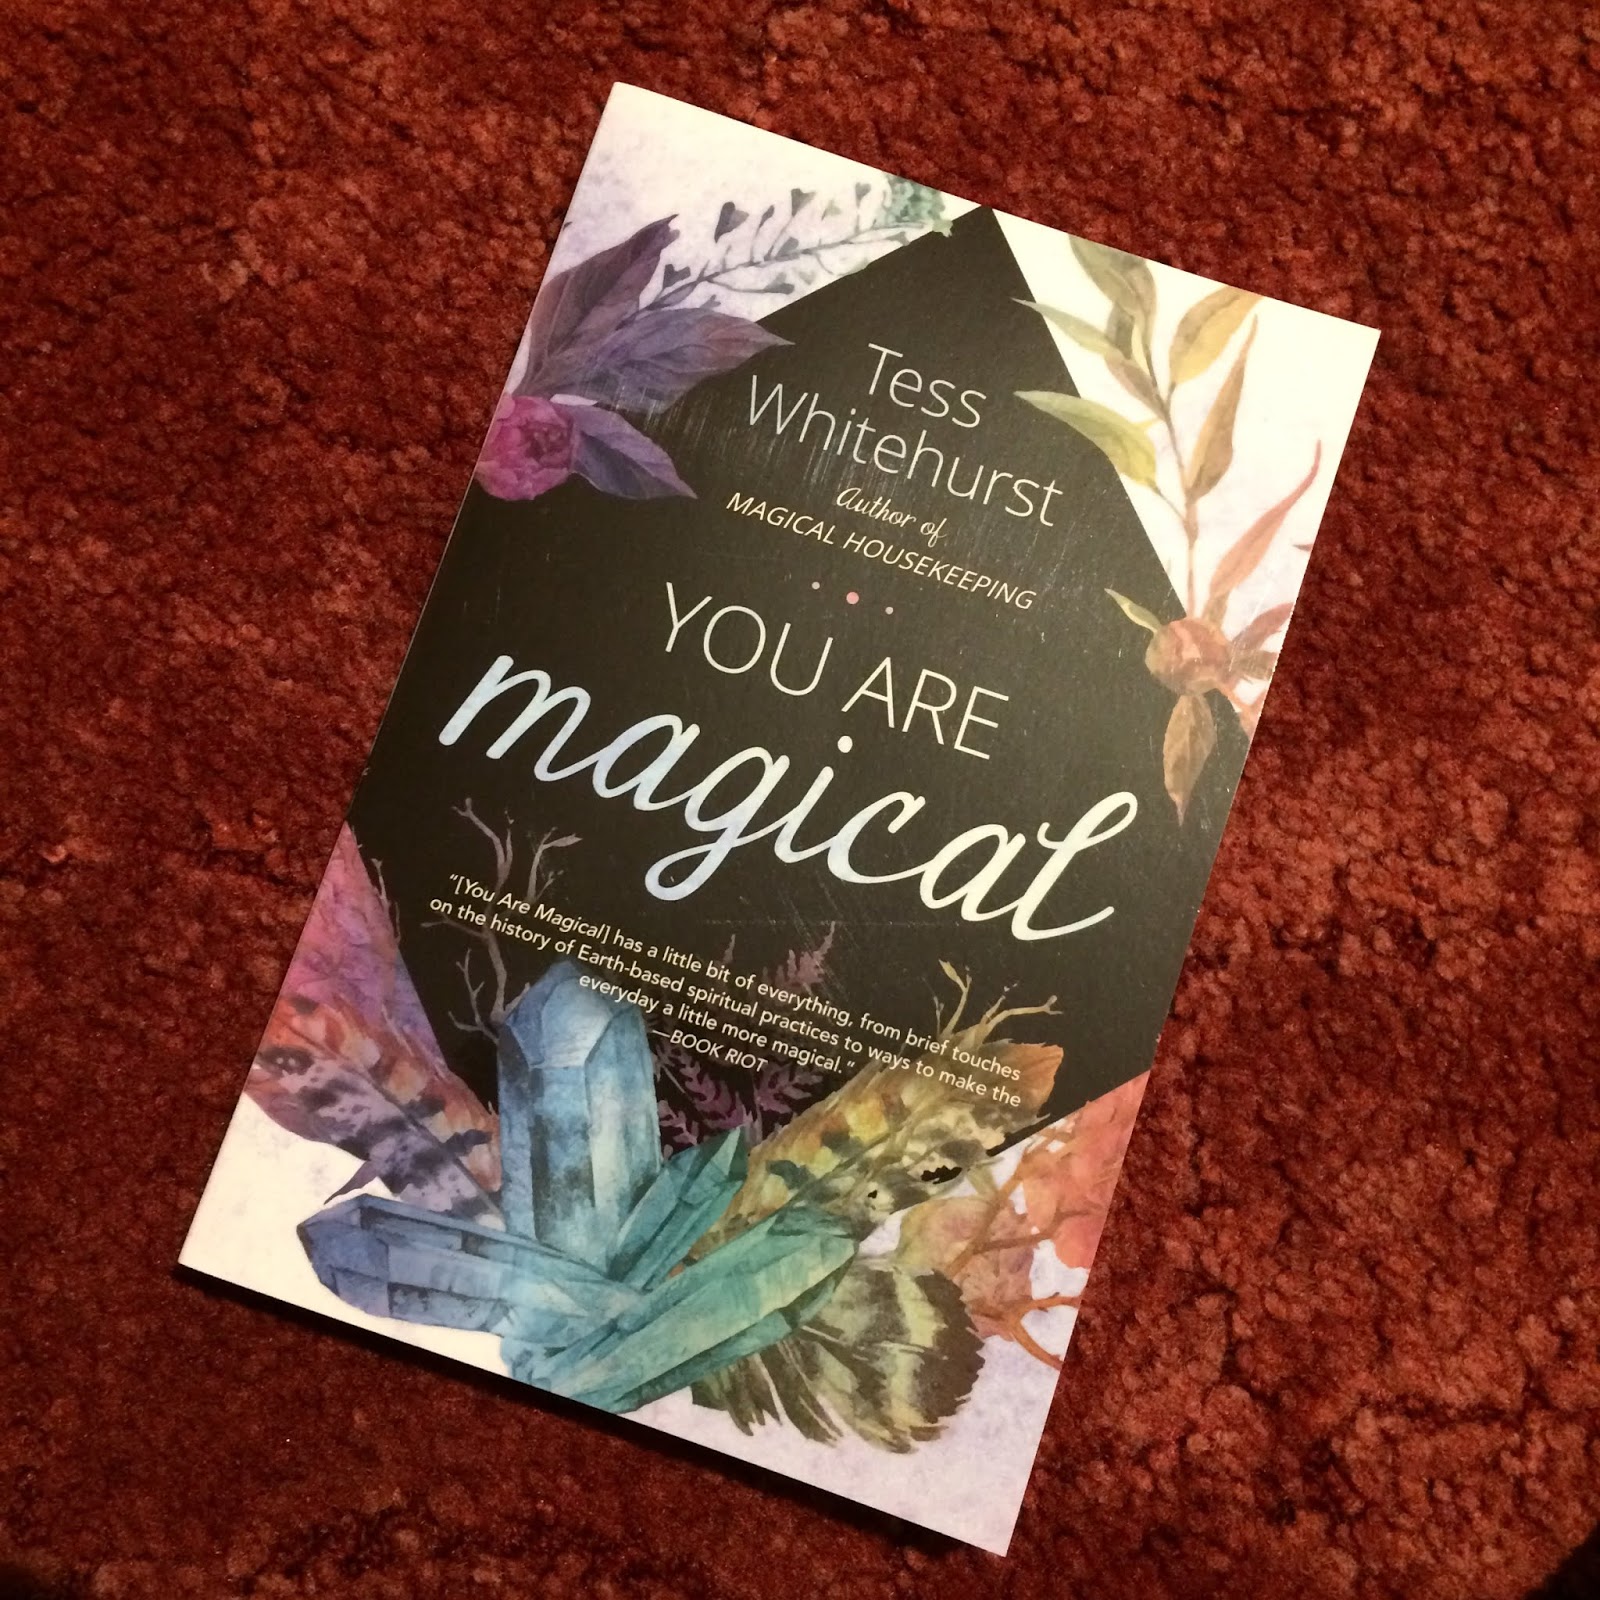 You Are Magical by Tess Whitehurst